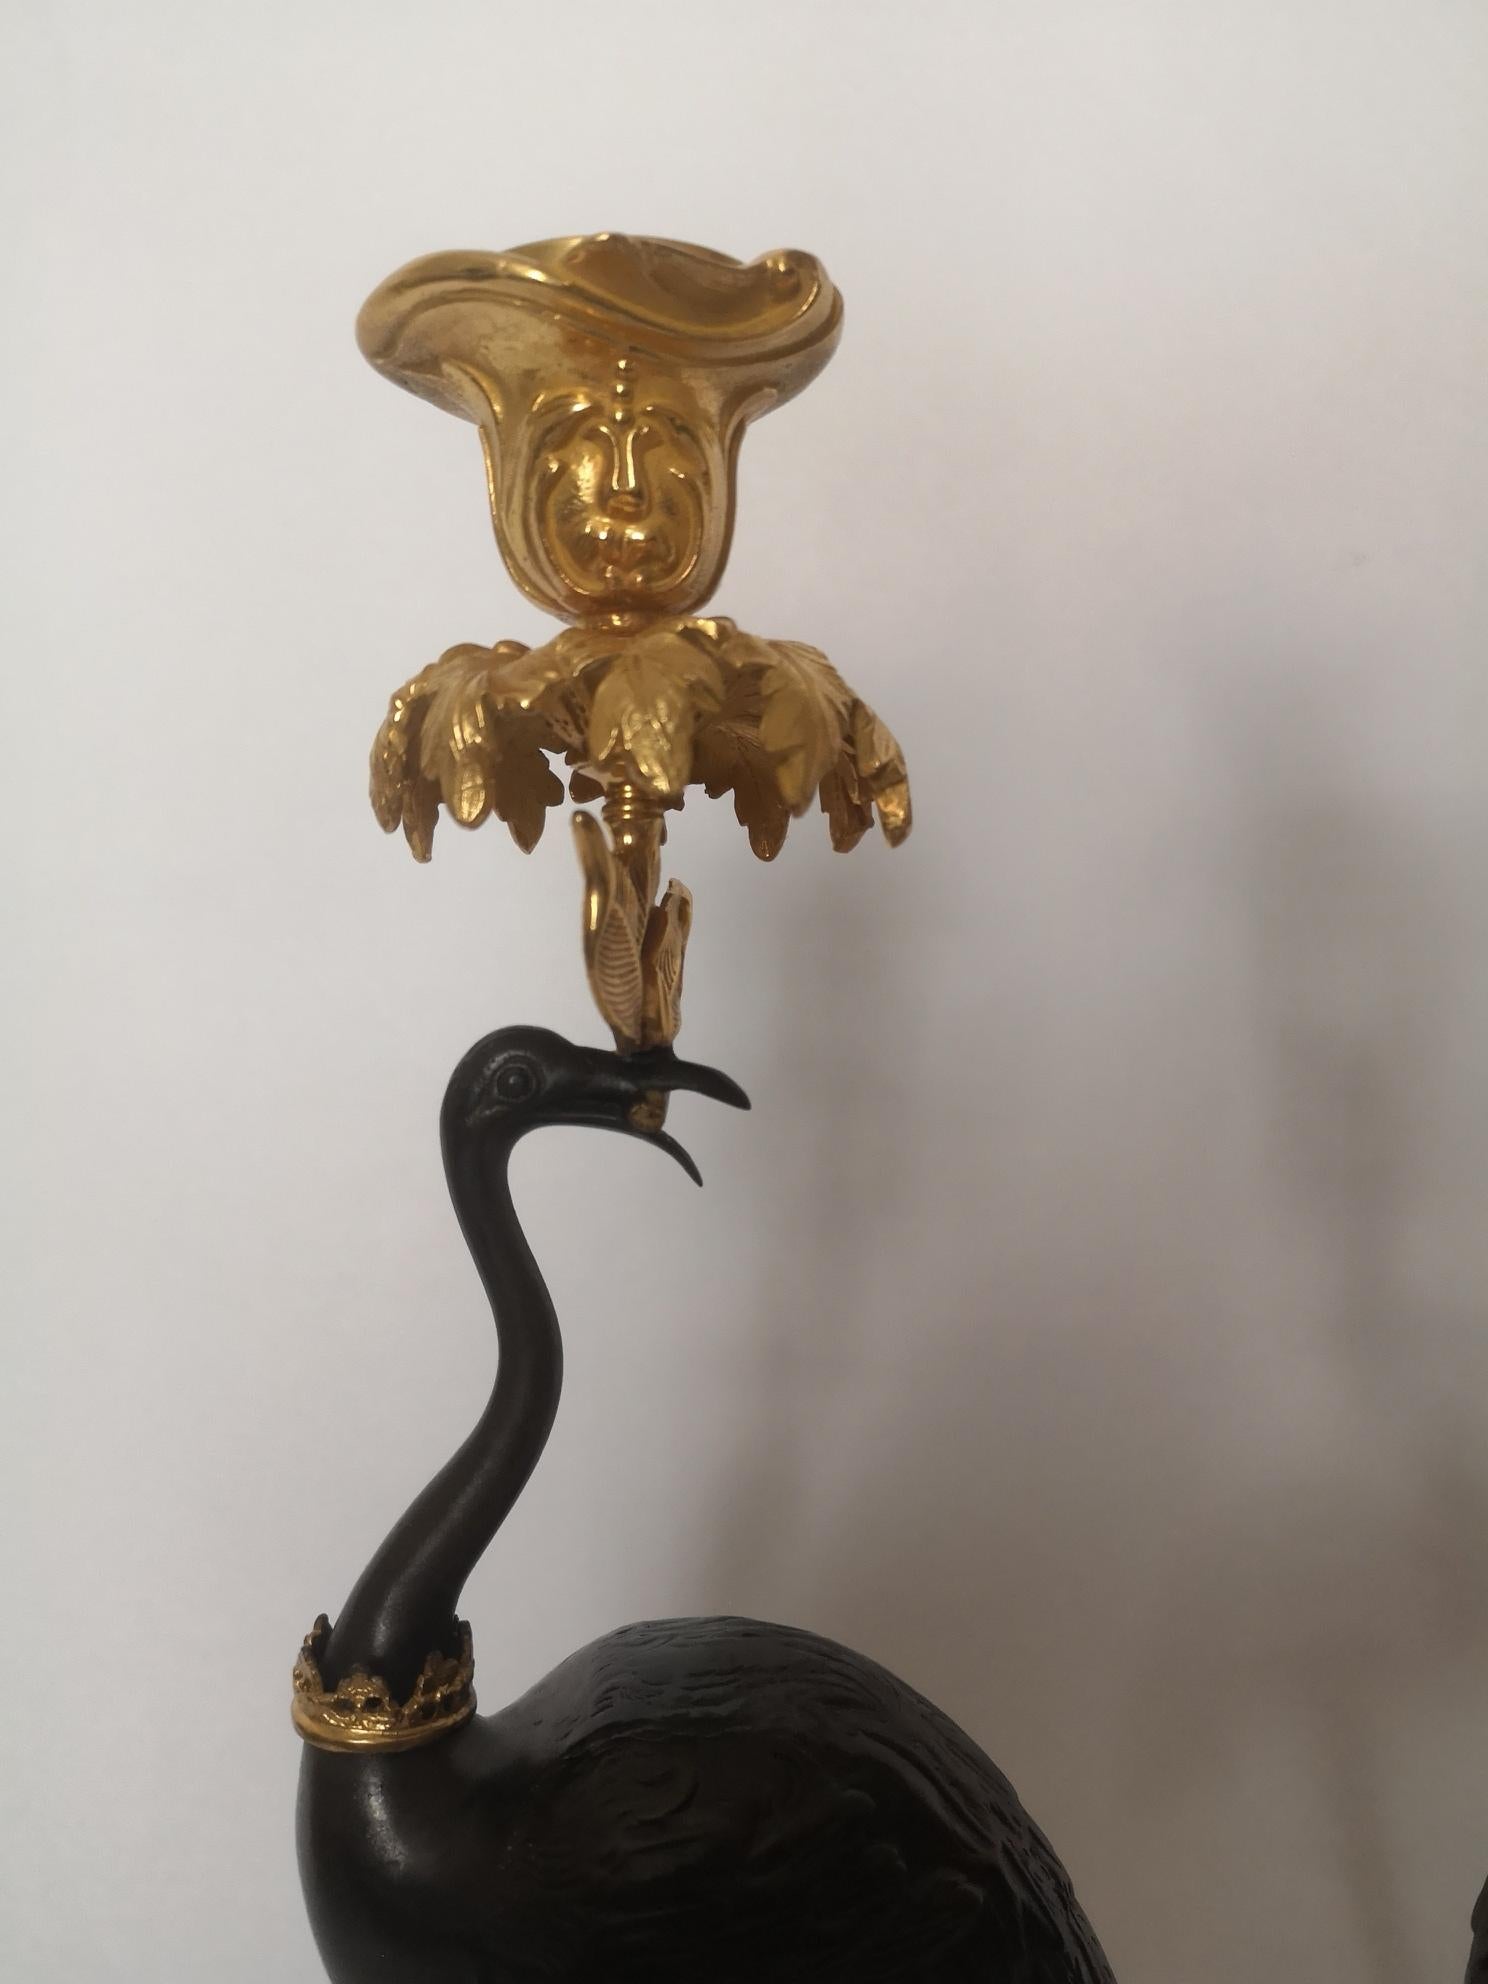 Pair of Early 19th Century English Bronze and Gilt Stork Candlesticks by Abbot For Sale 2